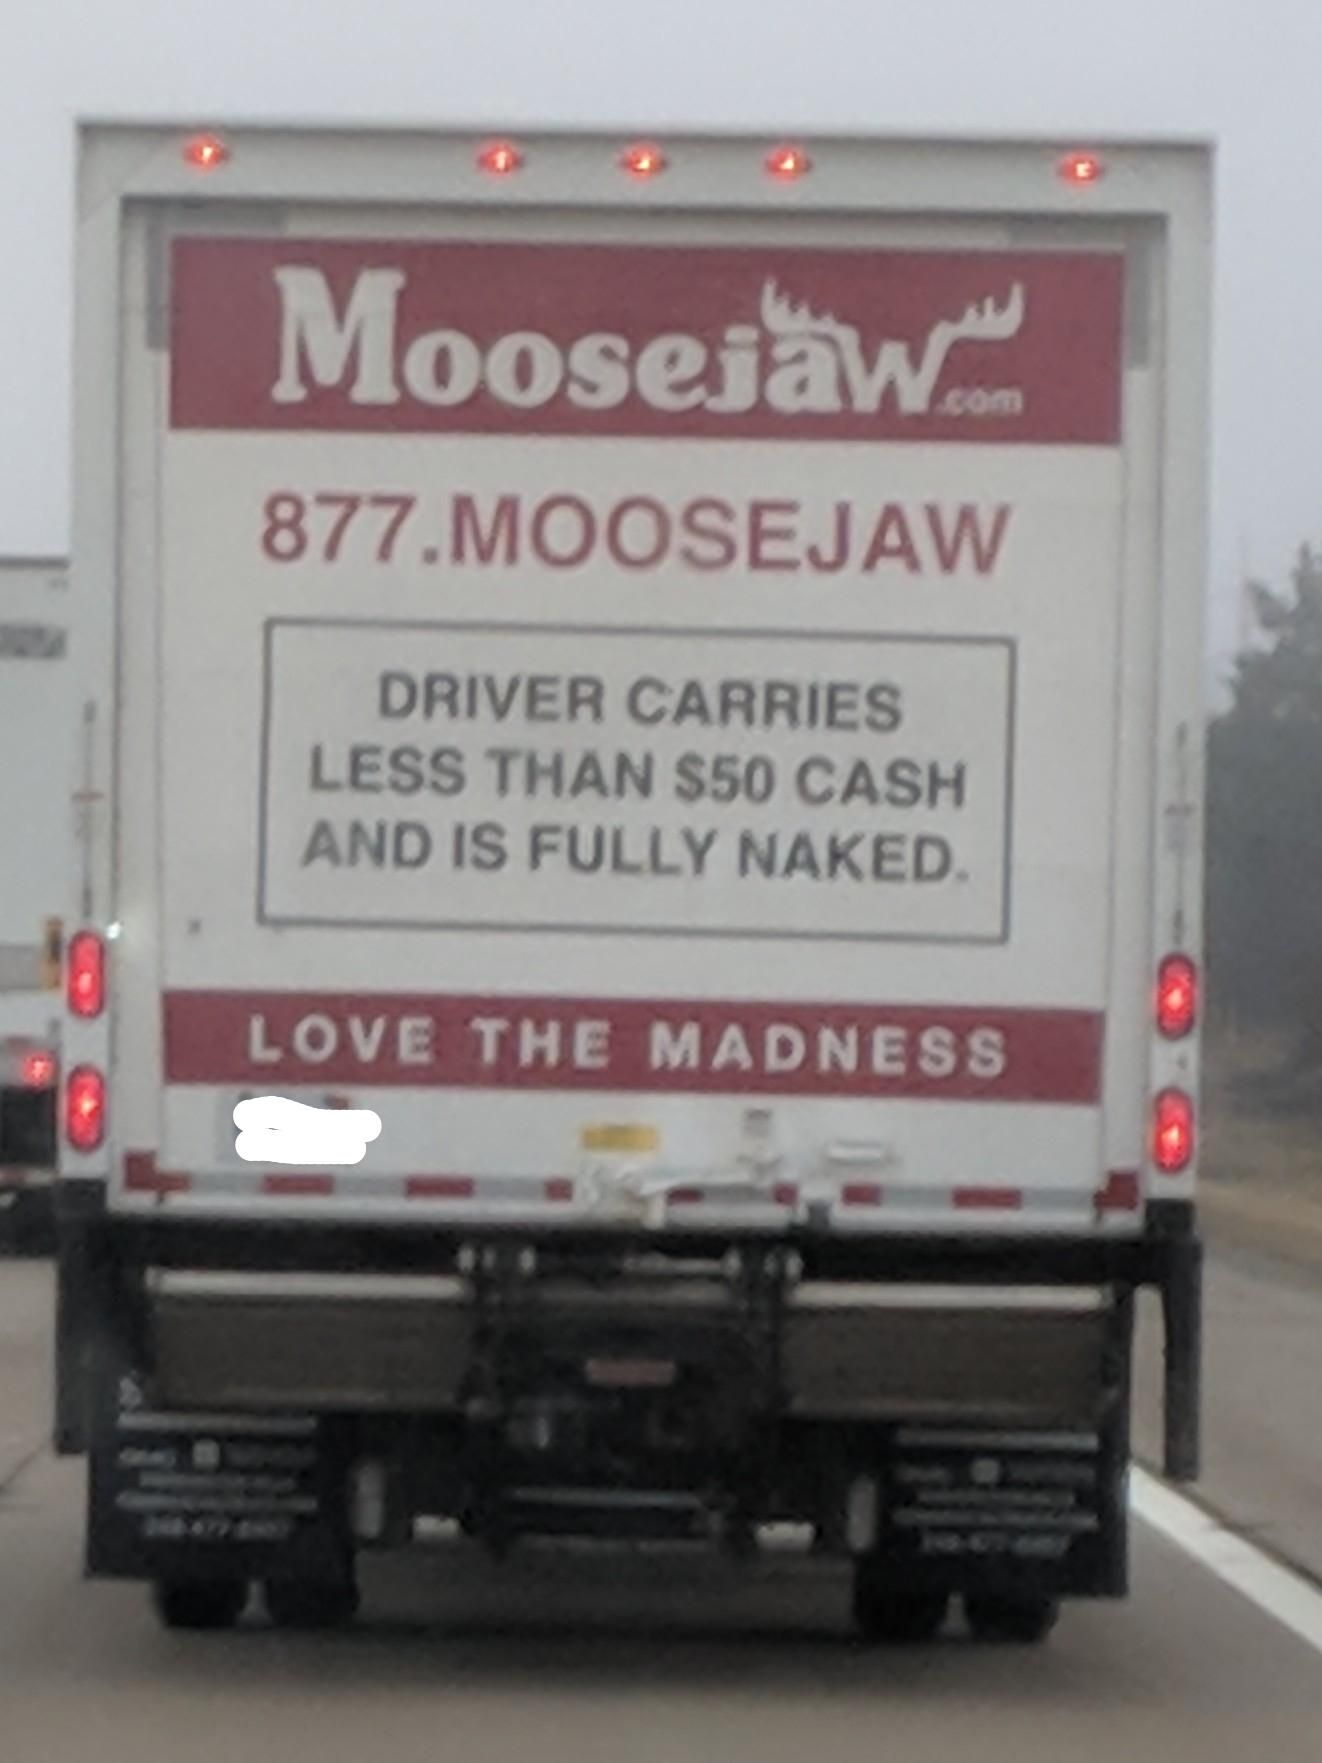 Saw this on the way to work ;)